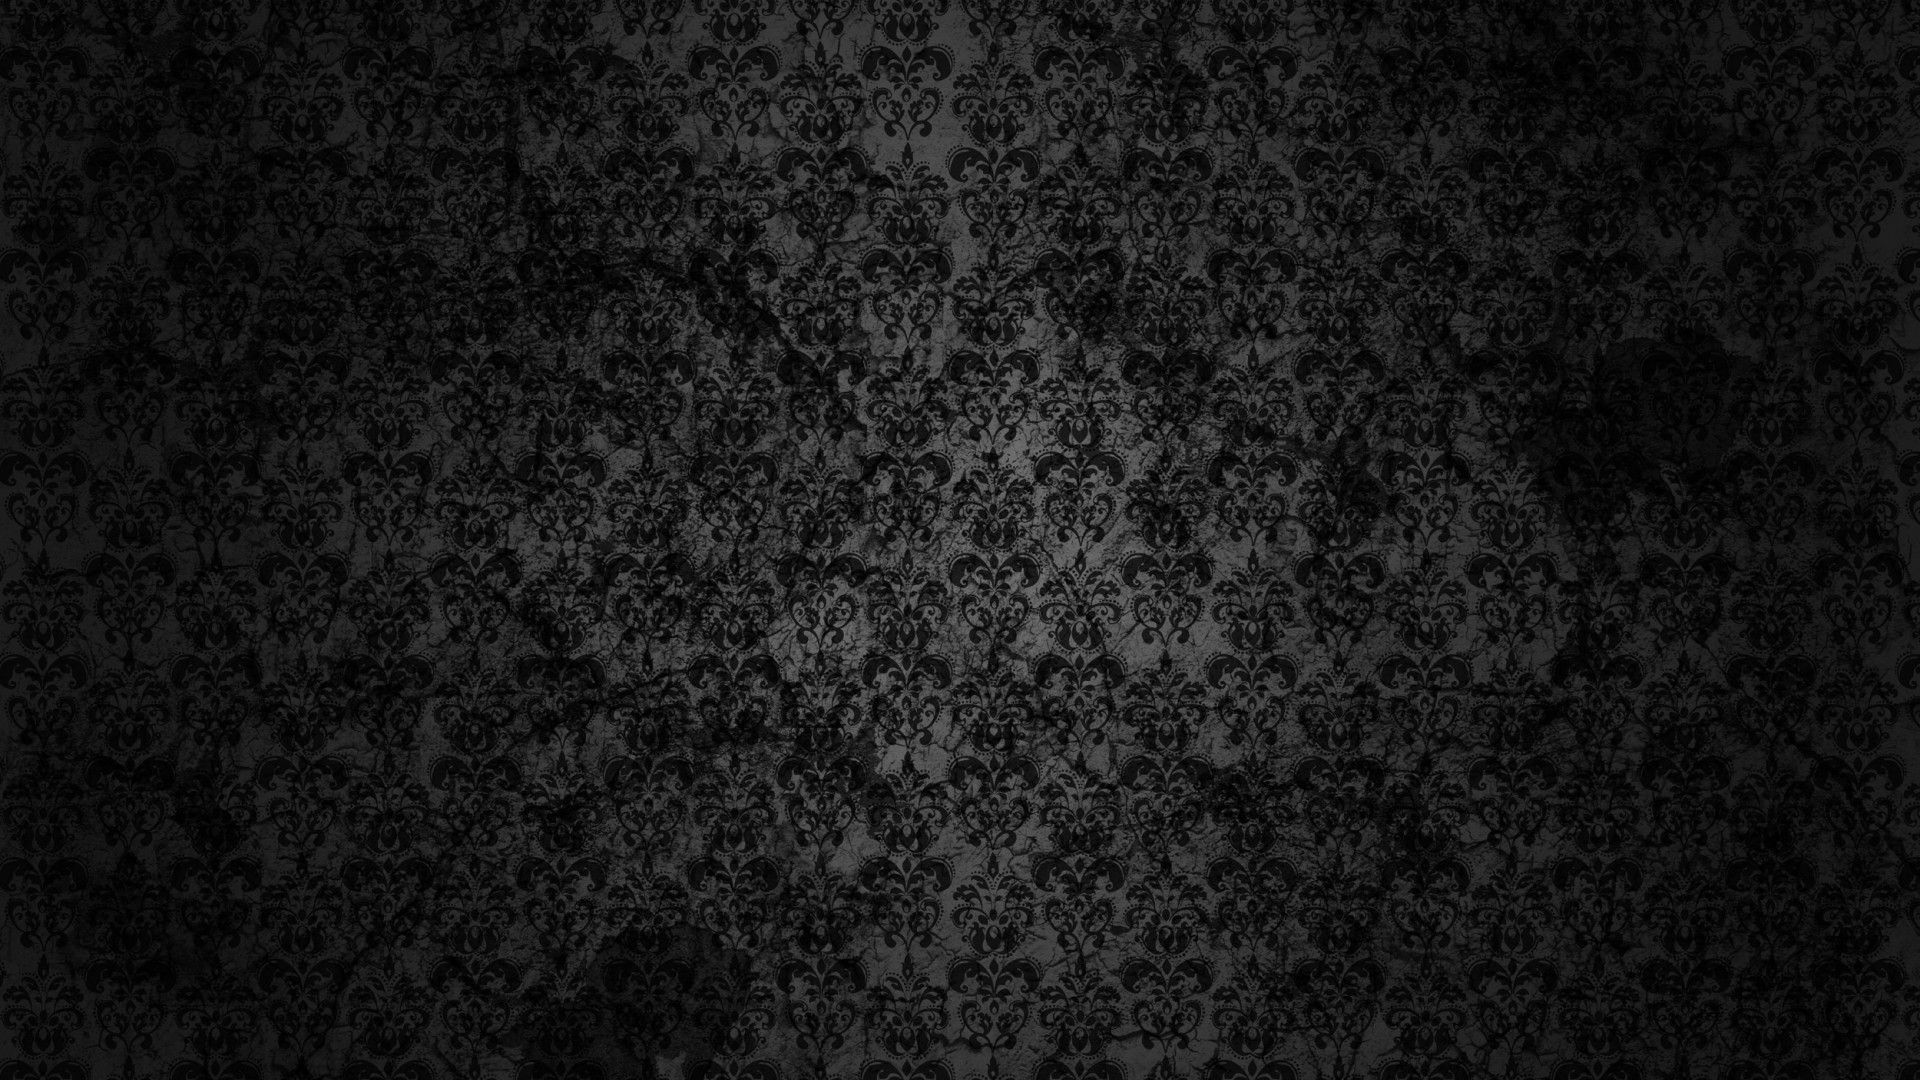 Black Damask Pattern Background This is a high resolution wallpaper for desktop and mobile devices. - Grunge